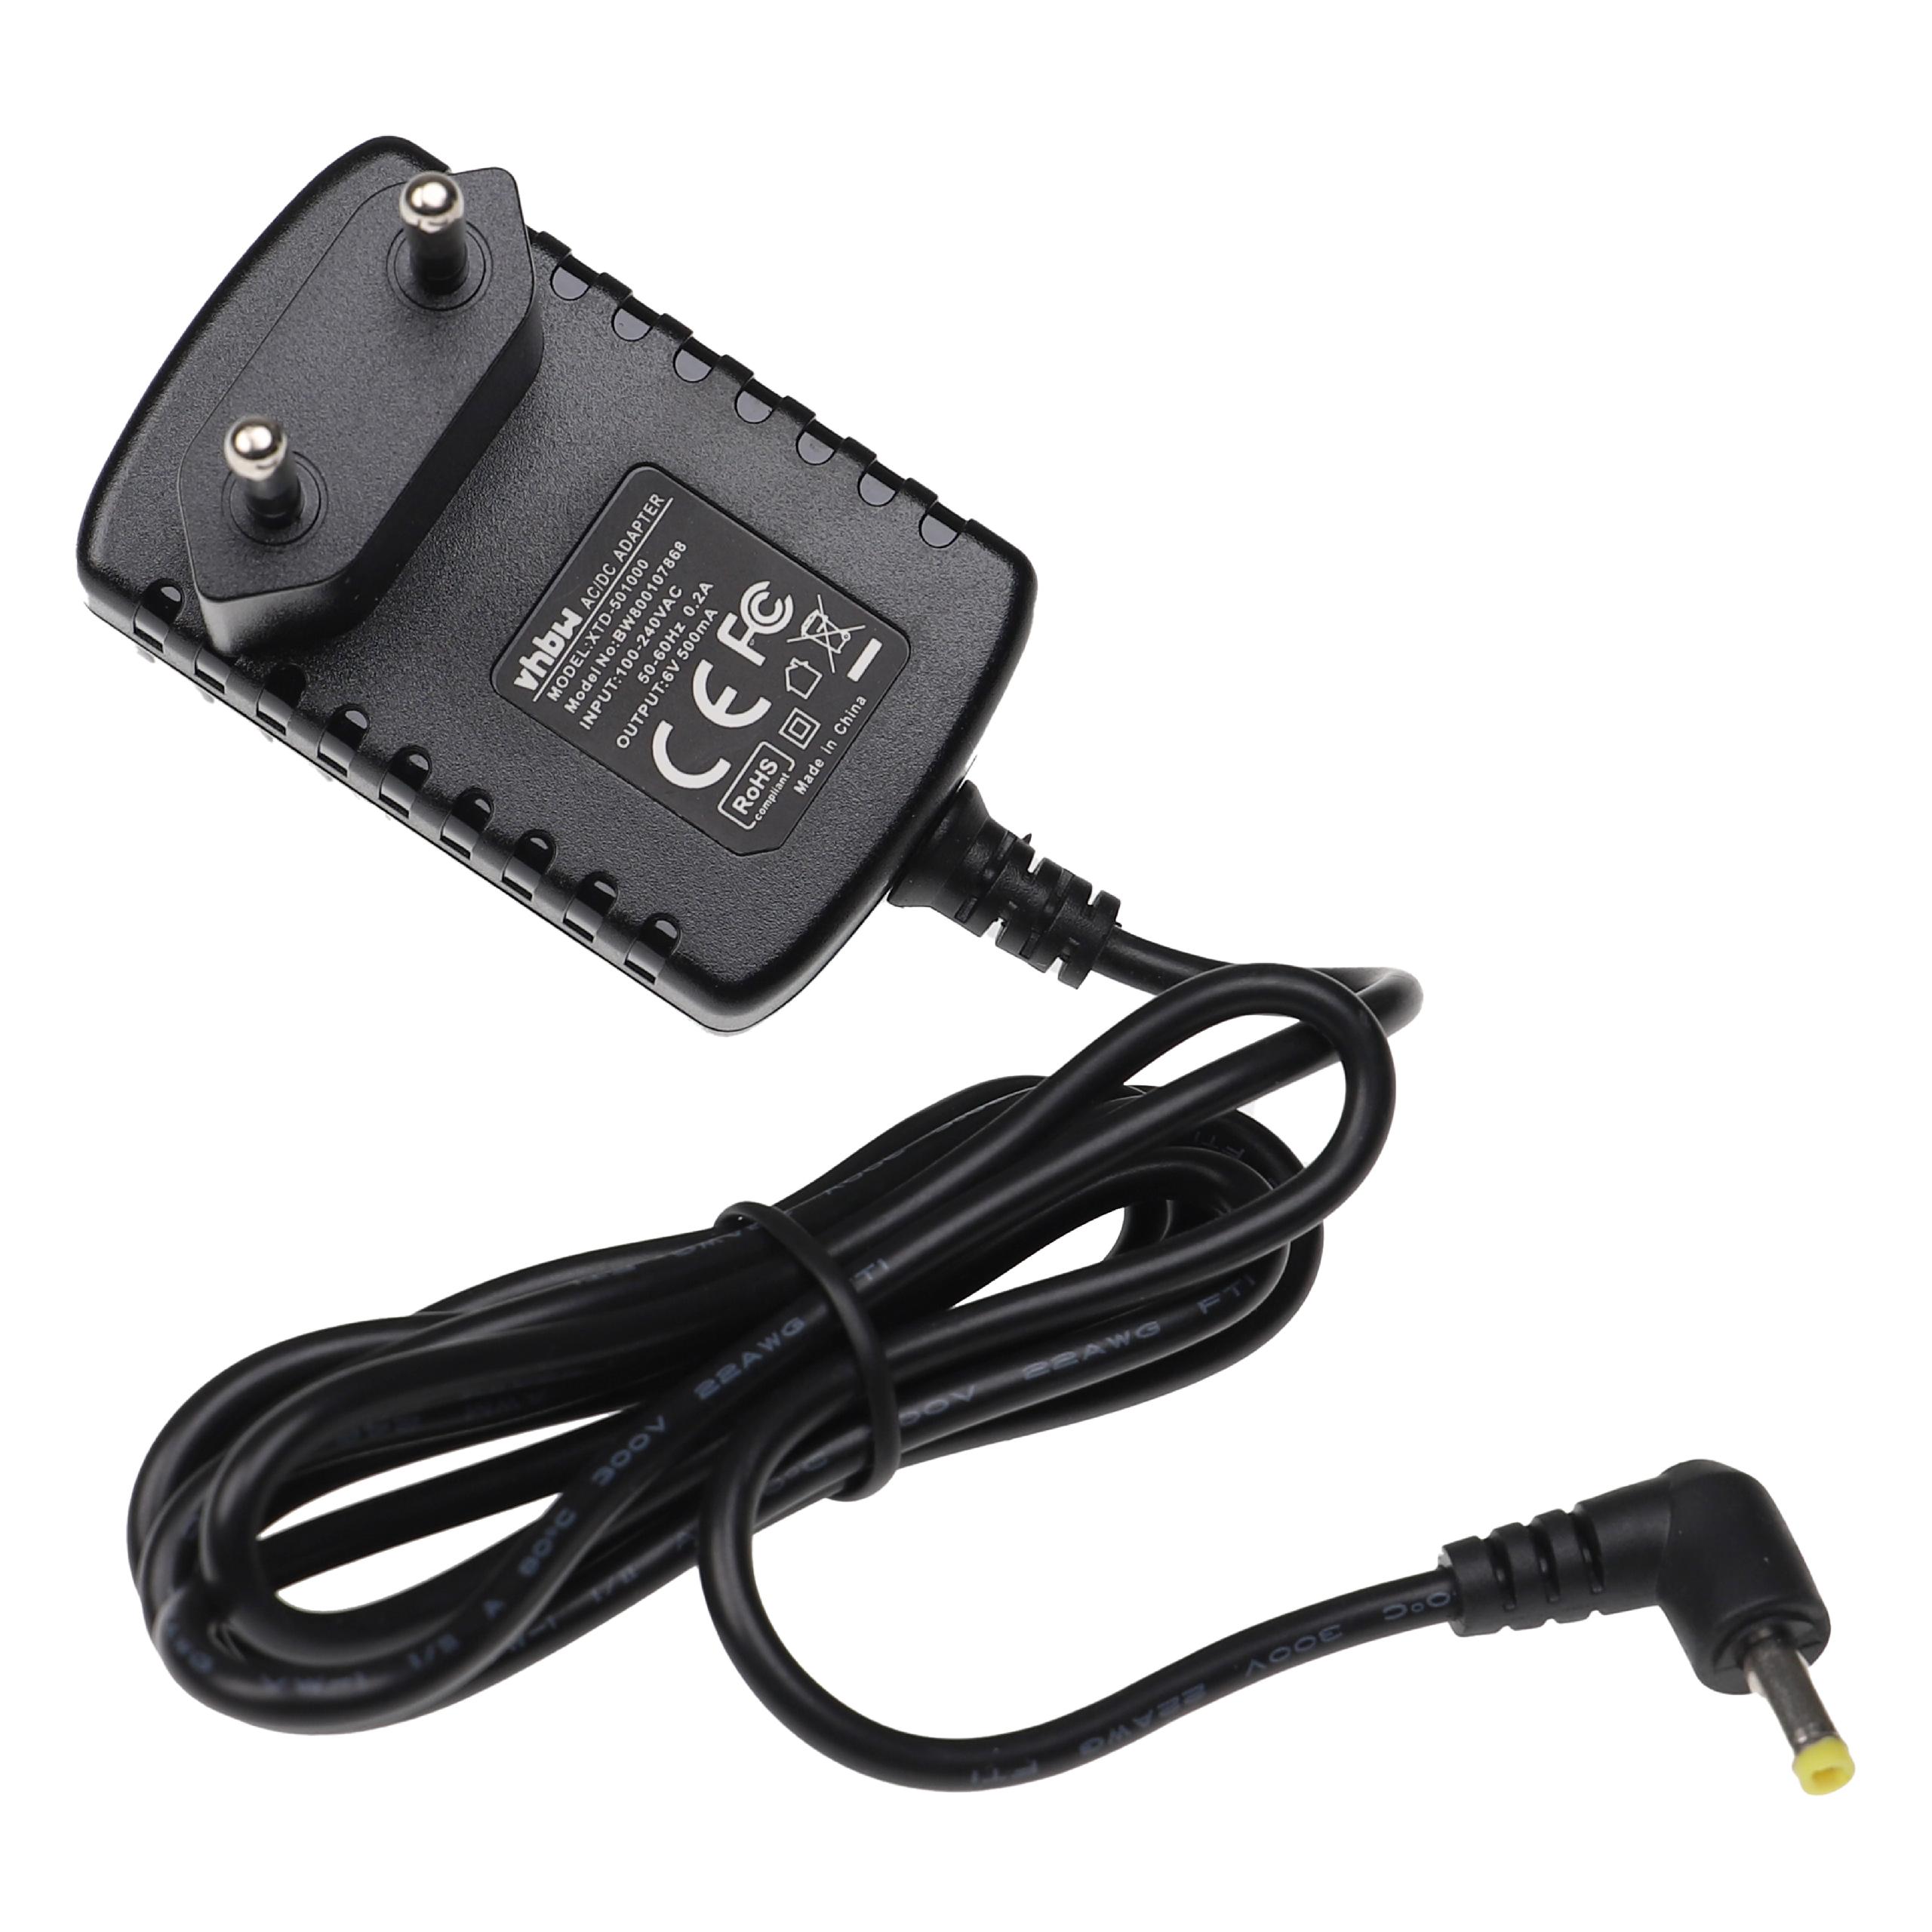 Power Adapter replaces Omron S(6024HW5SW) for OmronBlood Pressure Monitor - 111 cm, 6 V